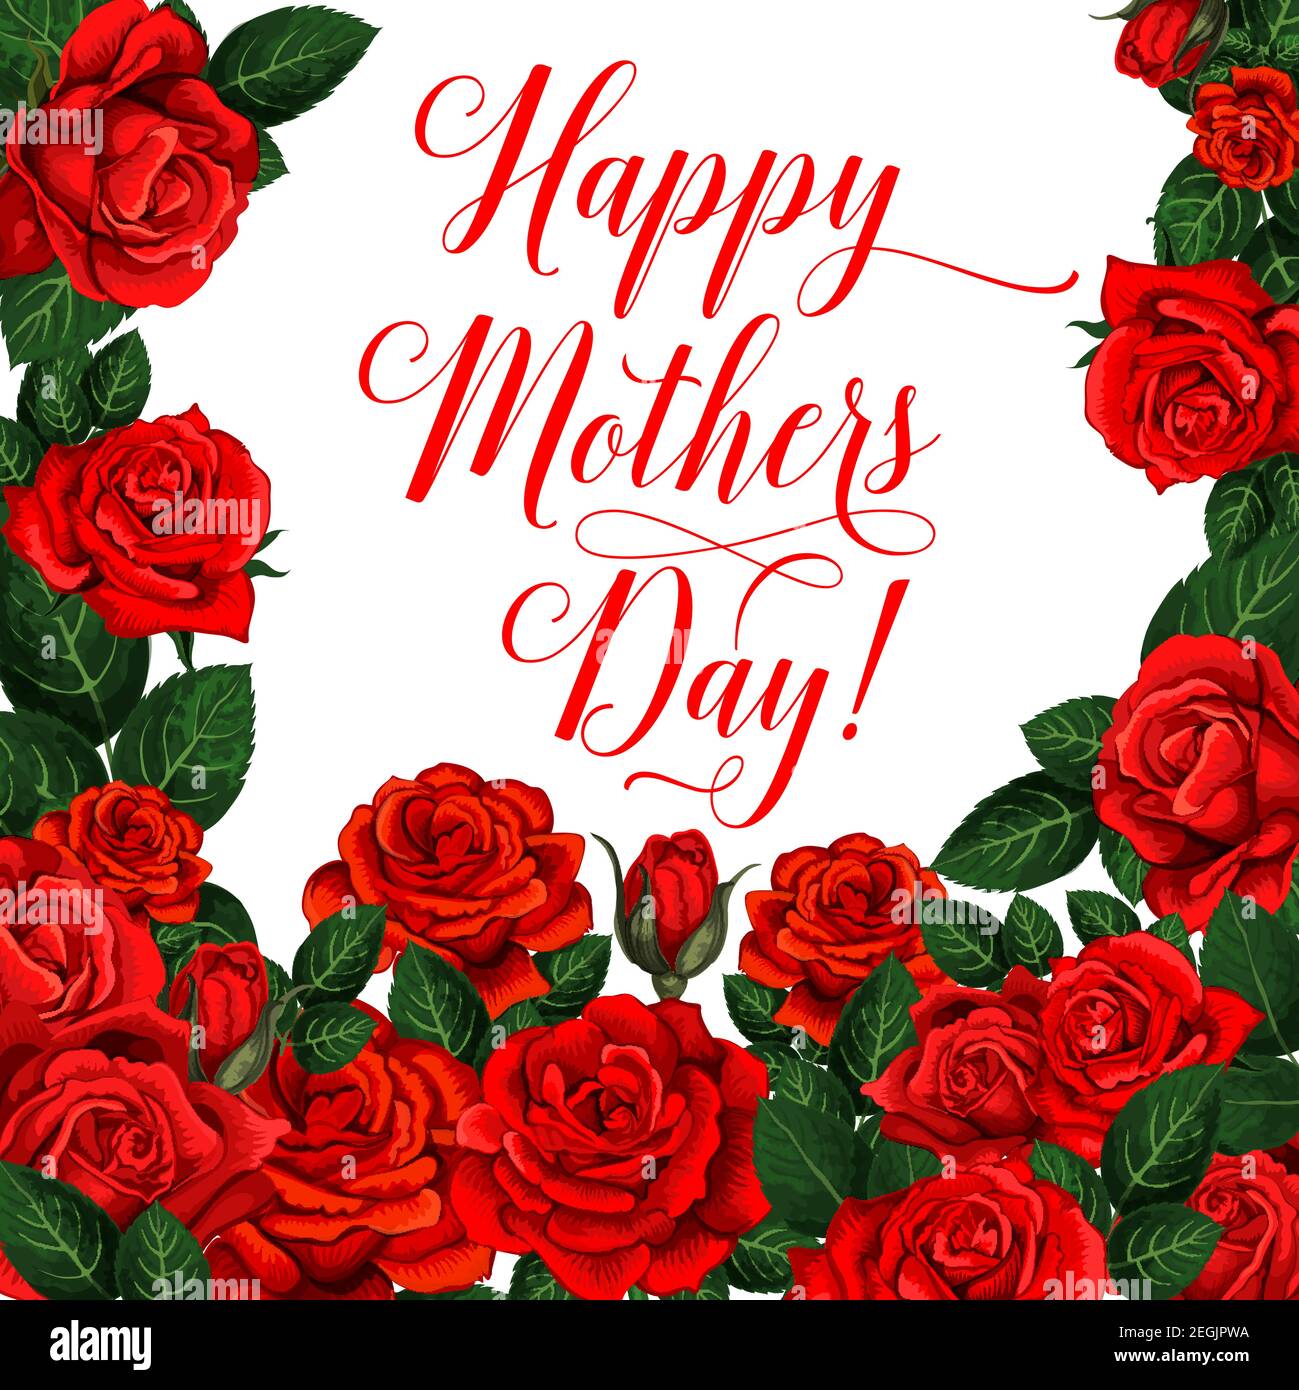 vector-poster-happy-mothers-day-greeting-card-with-red-roses-for-family-holiday-banner-with-roses-frame-for-greeting-card-on-mom-day-with-flowers-an-2EGJPWA.jpg